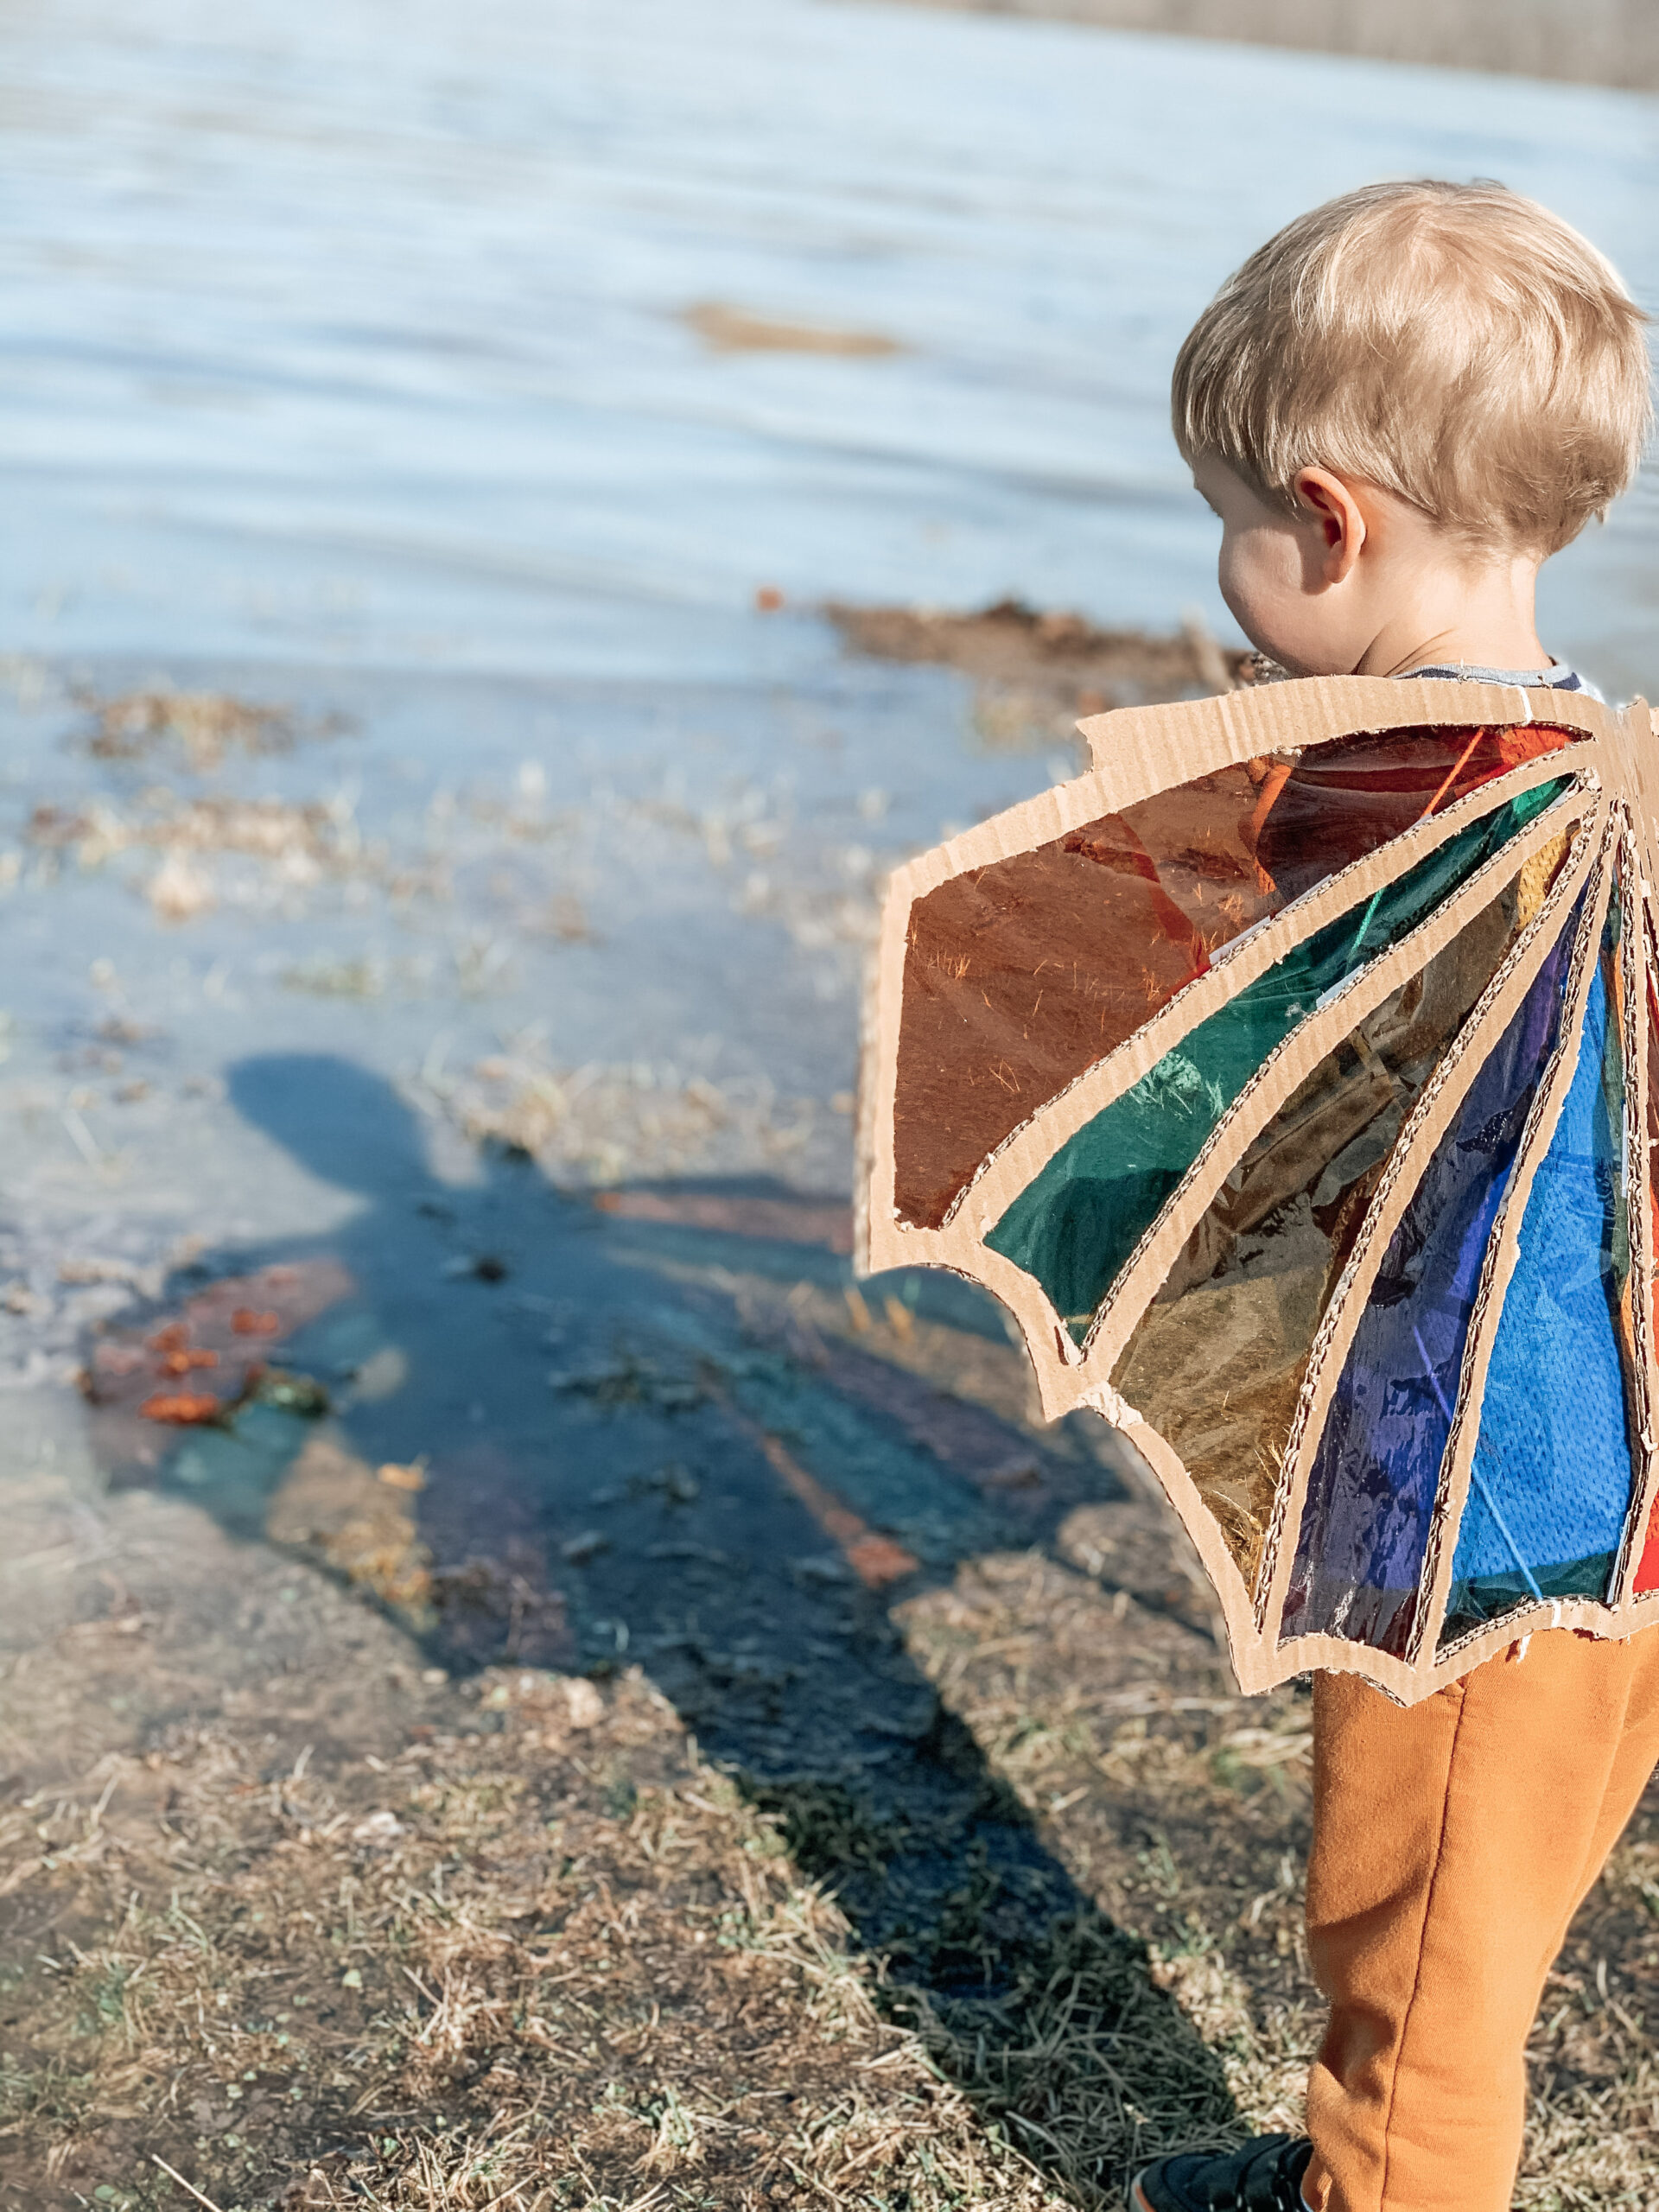 Kid wearing Dragon Wings casting a colorful shadow into the water using repurposed cardboard